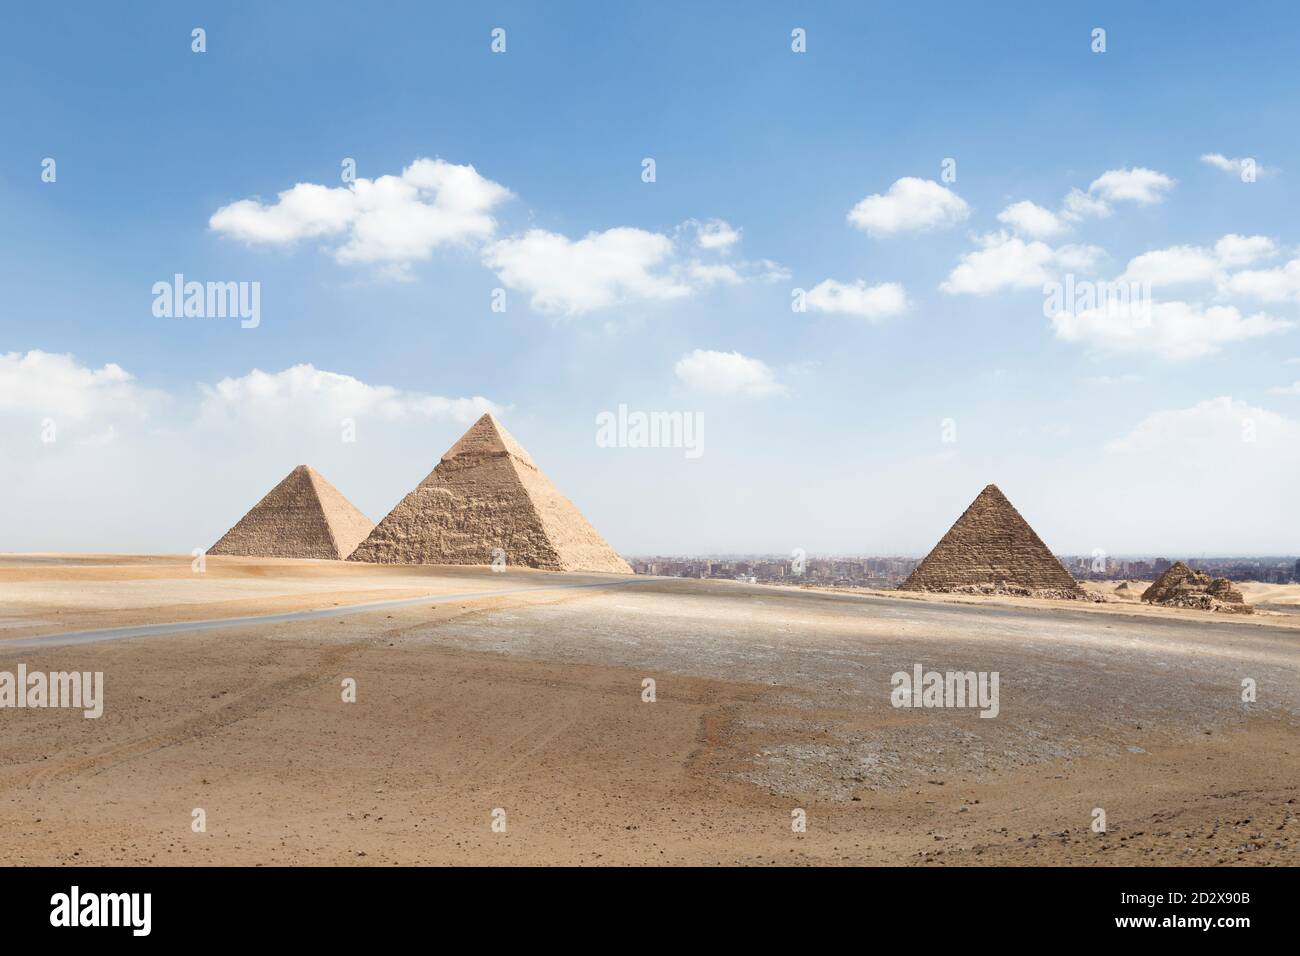 The three main pyramids with Cairo in the background, Giza, Egypt Stock Photo